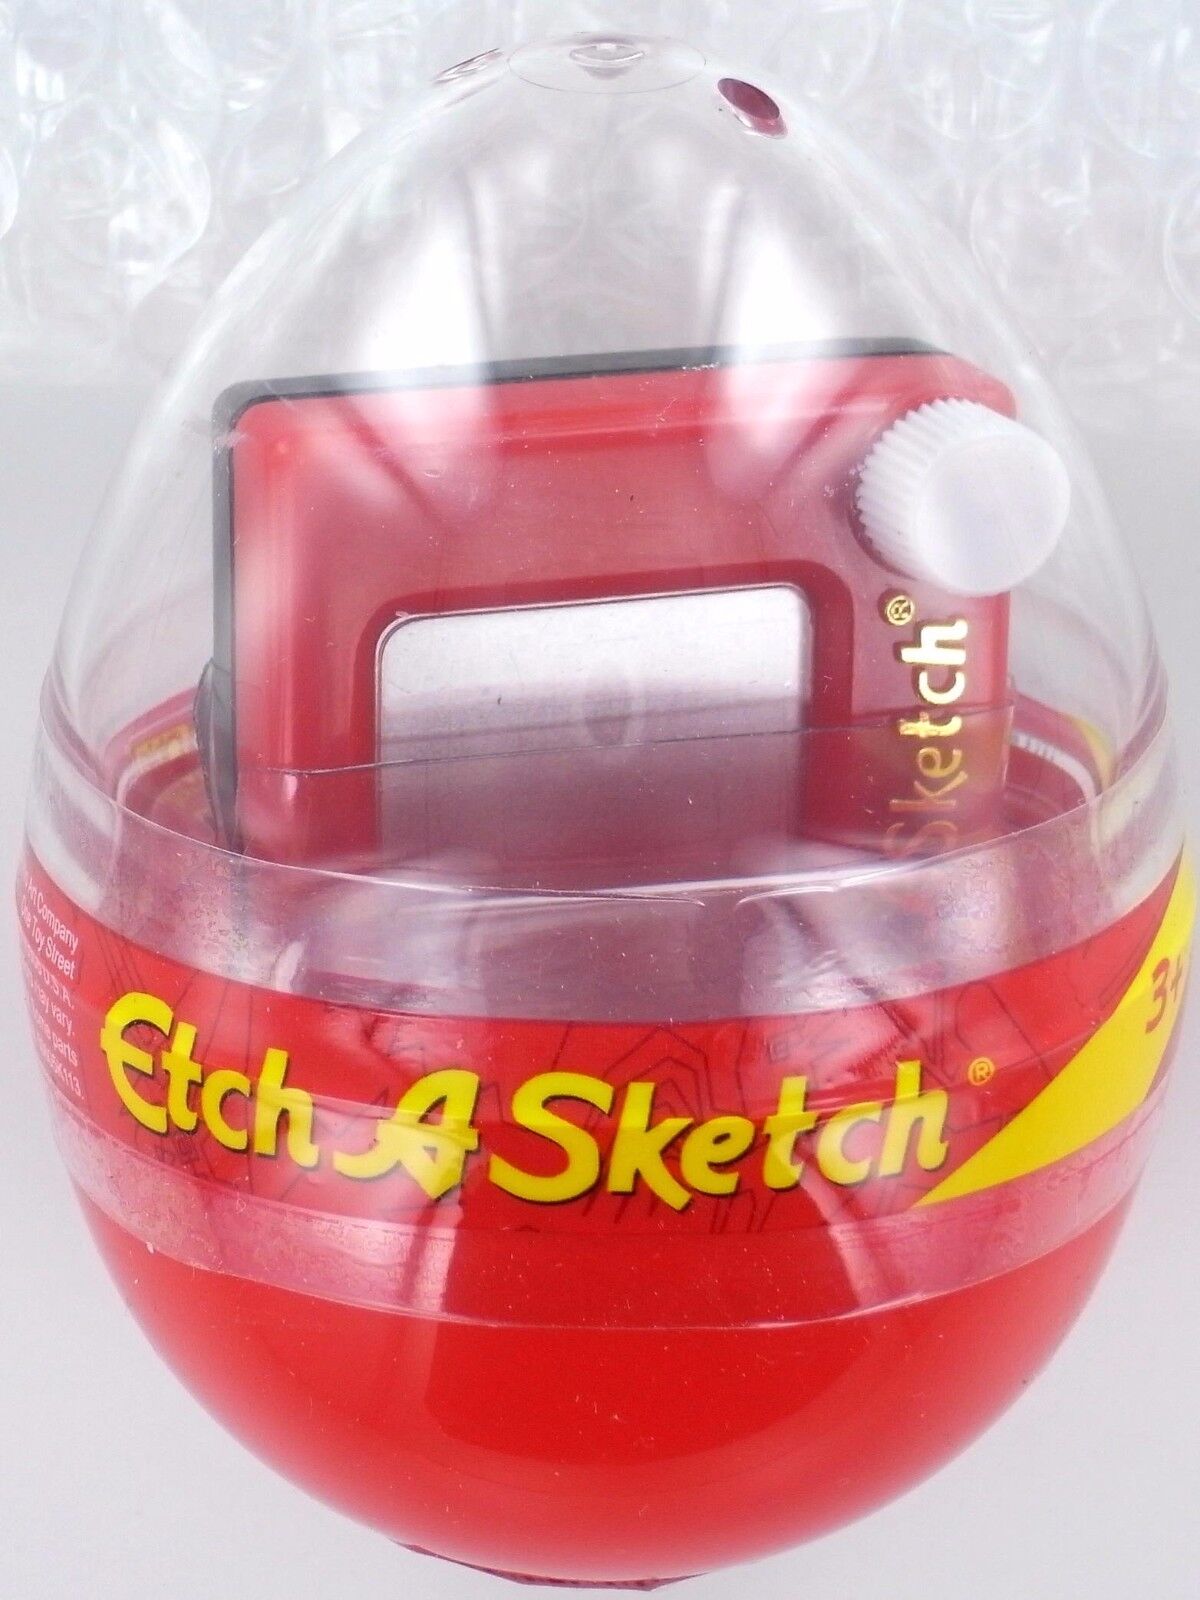 Mini Egg with ETCH A SKETCH Drawing Toy Ohio Art 50607 Miniature Doll NEW Easter